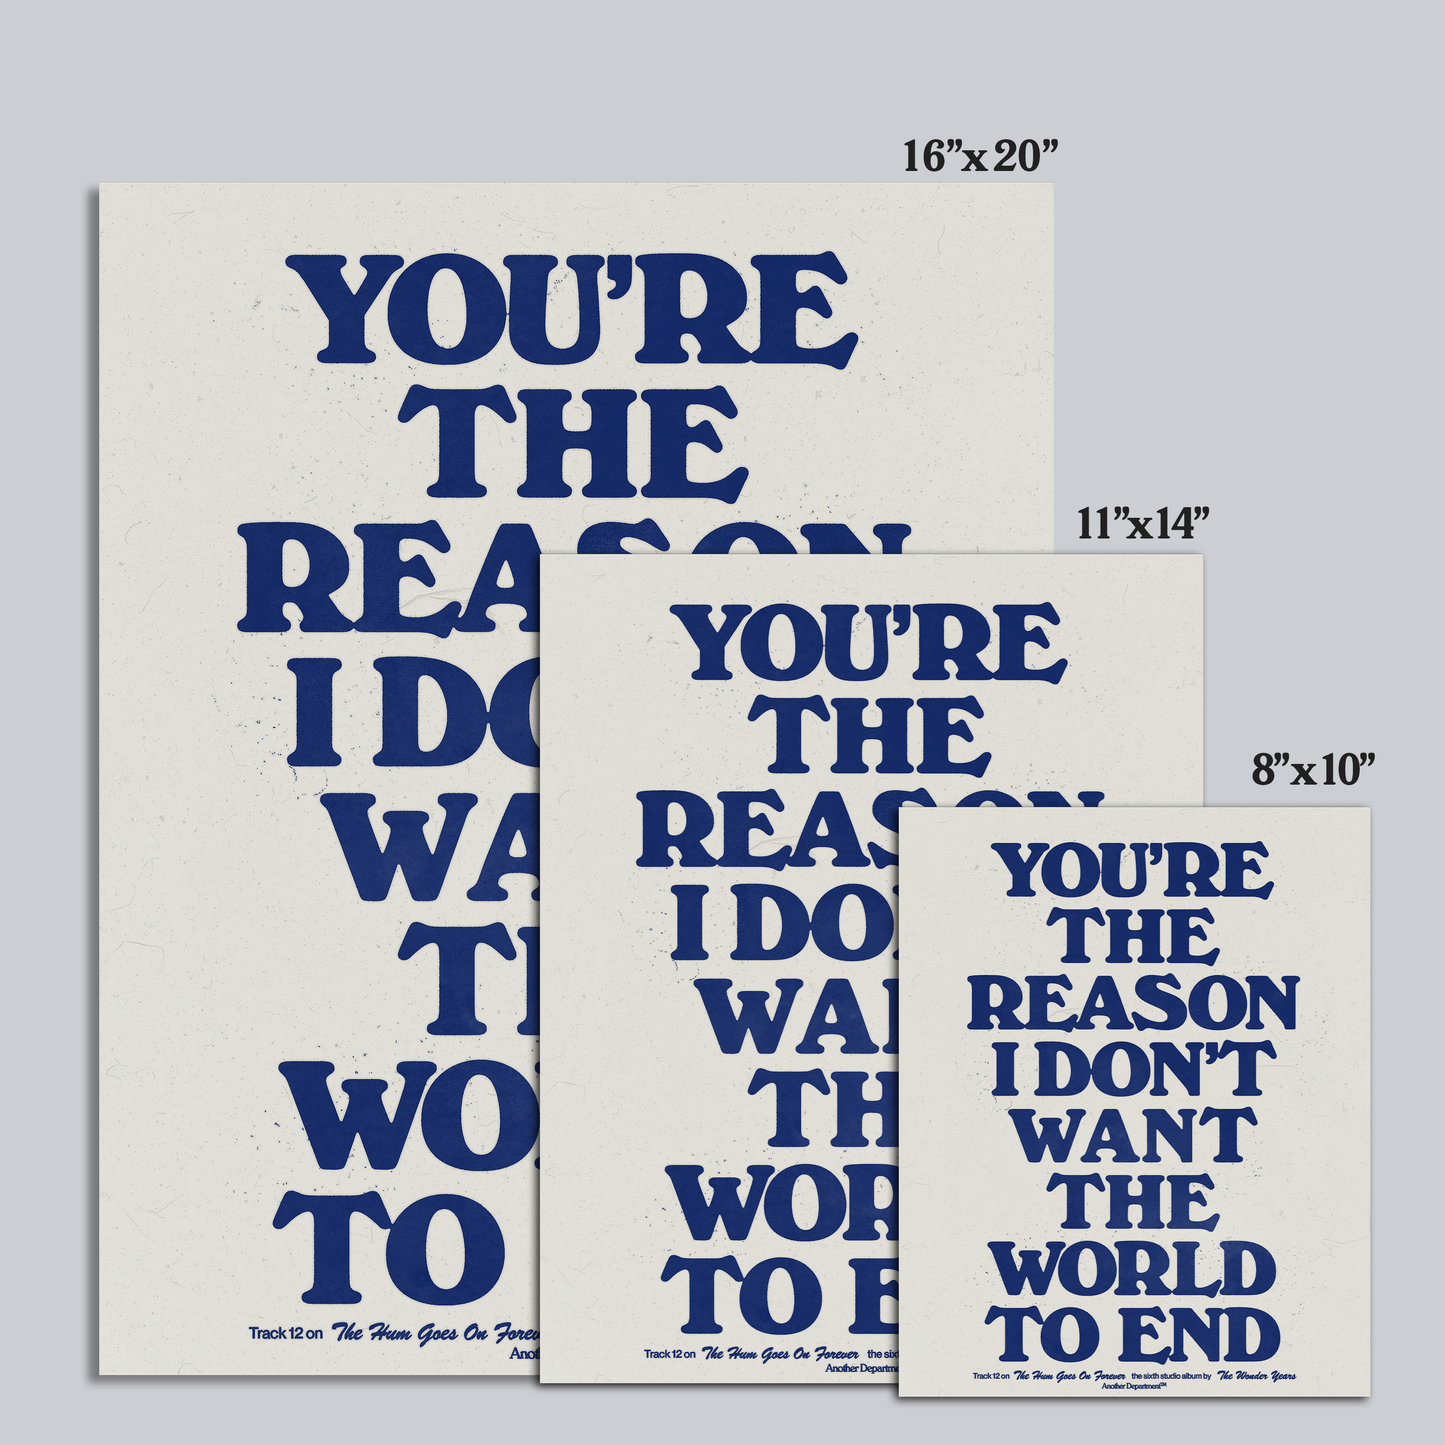 You're the Reason I Don't Want the World to End - Print